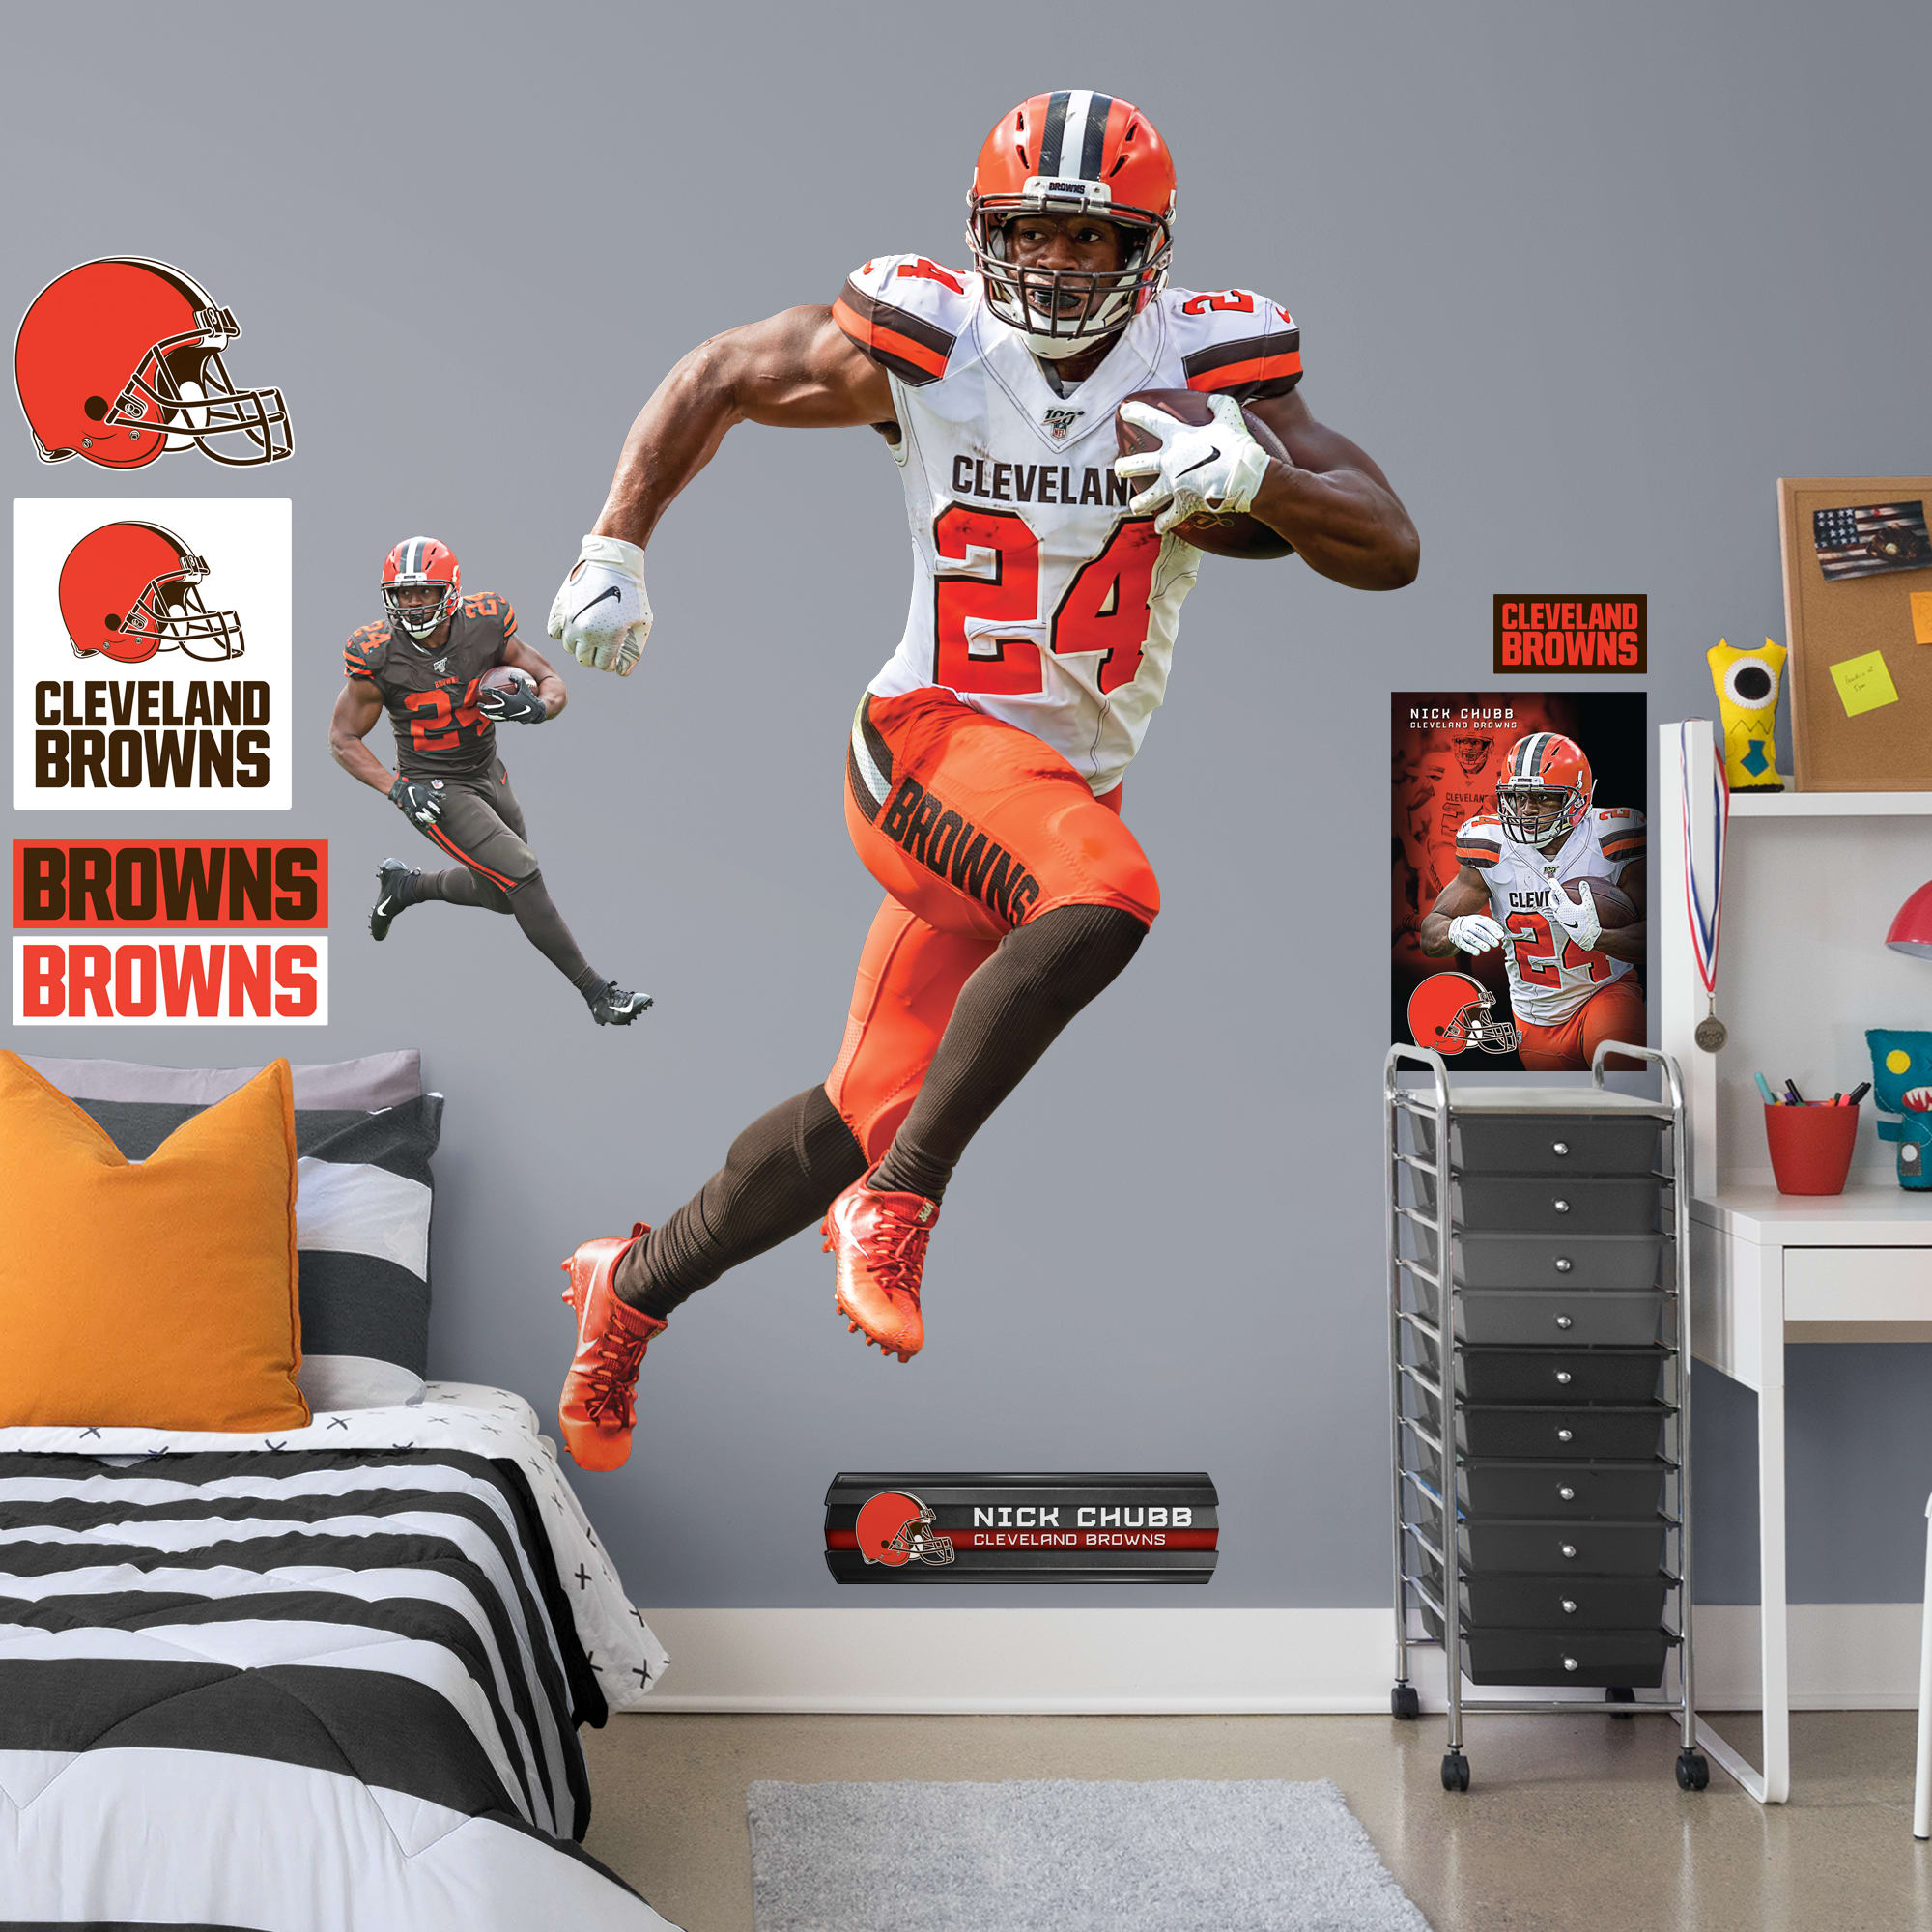 Nick Chubb for Cleveland Browns: Gamebreaker - Officially Licensed NFL Removable Wall Decal Life-Size Athlete + 10 Decals (48"W